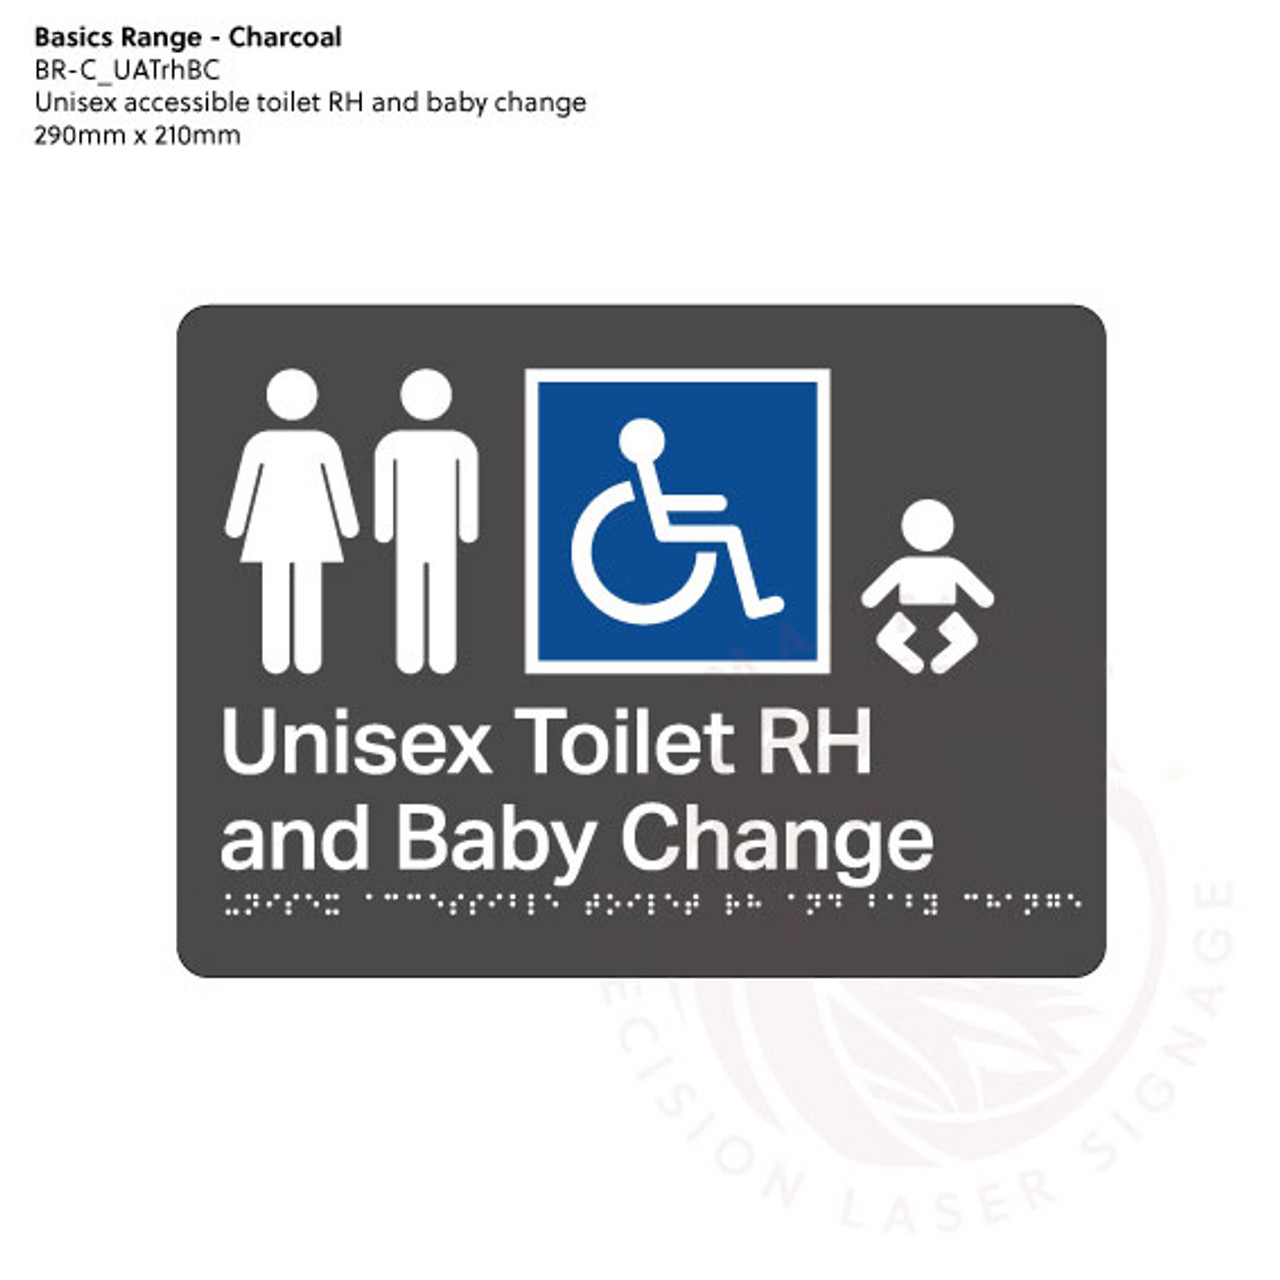 Basics Range - Charcoal Braille Signs - Unisex Accessible Toilet RH and Baby Change